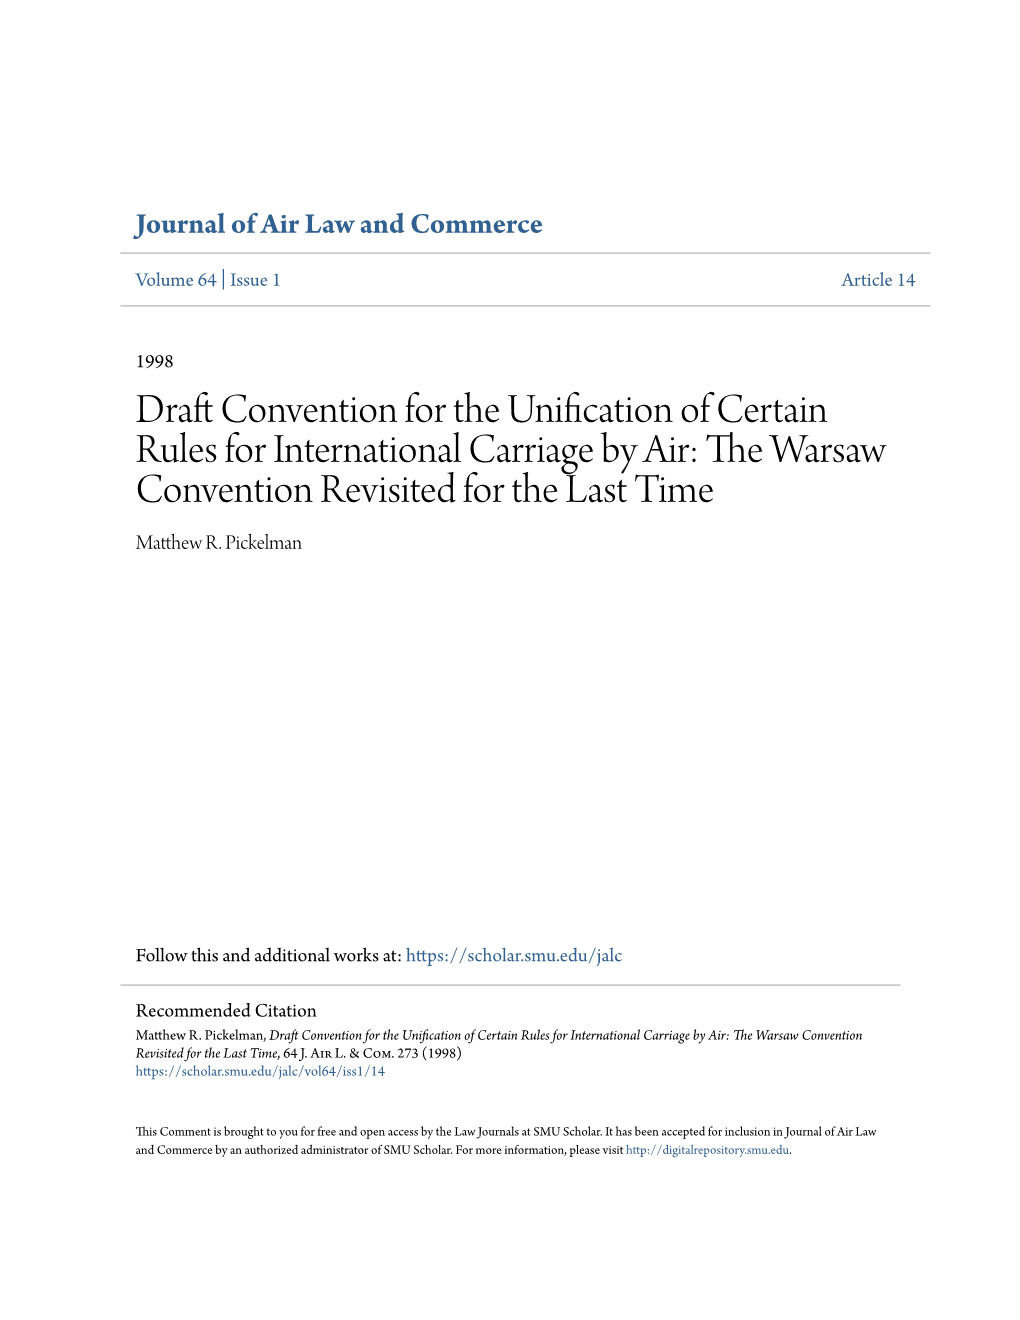 Draft Convention for the Unification of Certain Rules for International Carriage by Air: the Warsaw Convention Revisited for the Last Time, 64 J